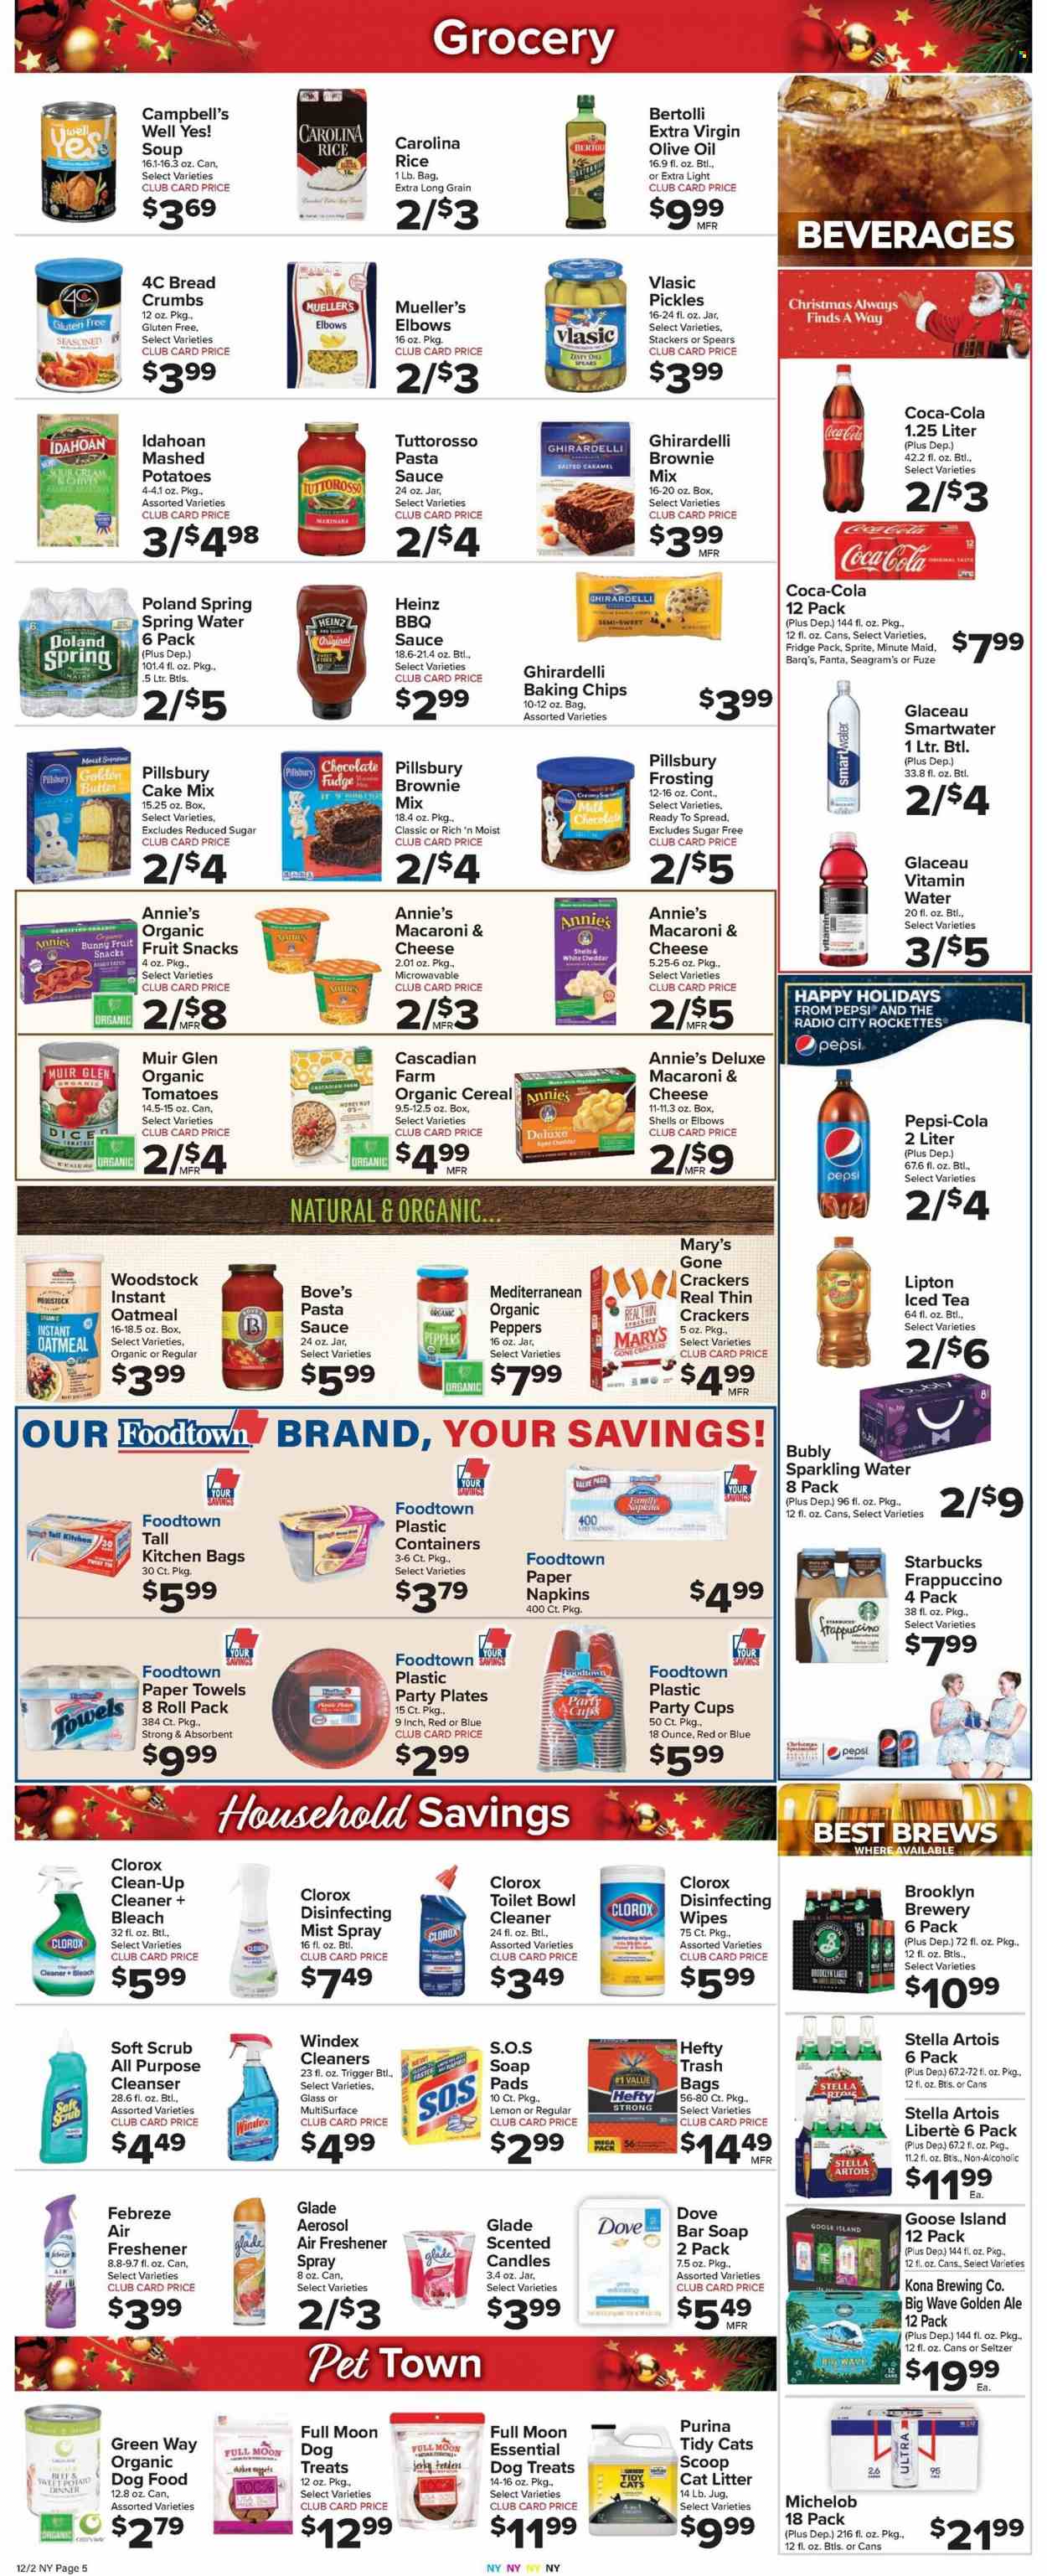 thumbnail - Foodtown Flyer - 12/02/2022 - 12/08/2022 - Sales products - breadcrumbs, brownie mix, cake mix, sweet potato, peppers, chives, Campbell's, macaroni & cheese, mashed potatoes, pasta sauce, soup, nuggets, sauce, Pillsbury, chicken nuggets, Annie's, Bertolli, jerky, butter, Dove, fudge, chocolate, crackers, fruit snack, Ghirardelli, frosting, oatmeal, baking chips, Heinz, pickles, diced tomatoes, cereals, rice, dill, BBQ sauce, extra virgin olive oil, olive oil, oil, Coca-Cola, Sprite, Pepsi, Fanta, Lipton, ice tea, fruit punch, seltzer water, spring water, sparkling water, Smartwater, vitamin water, Starbucks, frappuccino, beer, Lager, wipes, napkins, kitchen towels, paper towels, Febreze, Windex, cleaner, bleach, Clorox, WAVE, soap bar, soap, cleanser, Hefty, plate, cup, candle, air freshener, Glade, freshener spray, plastic plate, party cups, animal food, cat litter, dog food, Purina, Stella Artois, Michelob. Page 5.